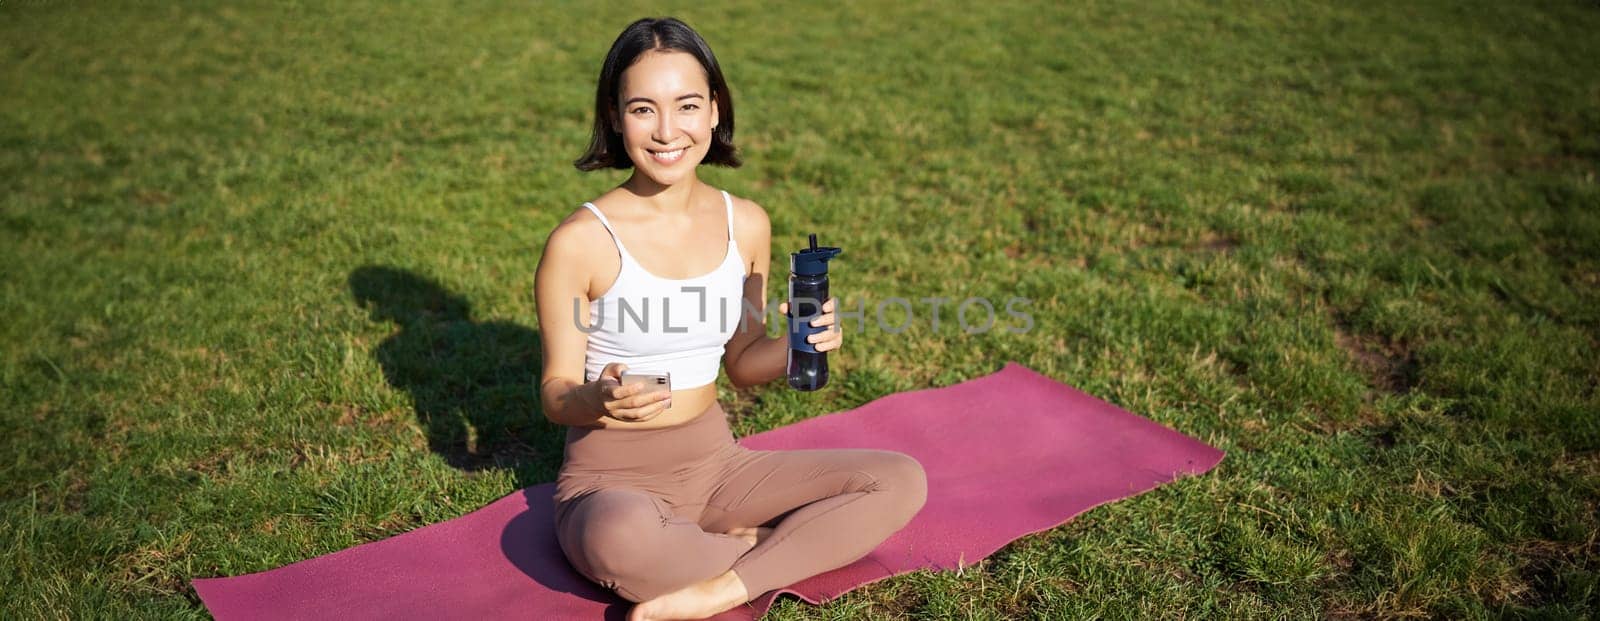 Smiling young asian woman sits on grass, doing exercises in park, workout on lawn, drinks water from bottle.